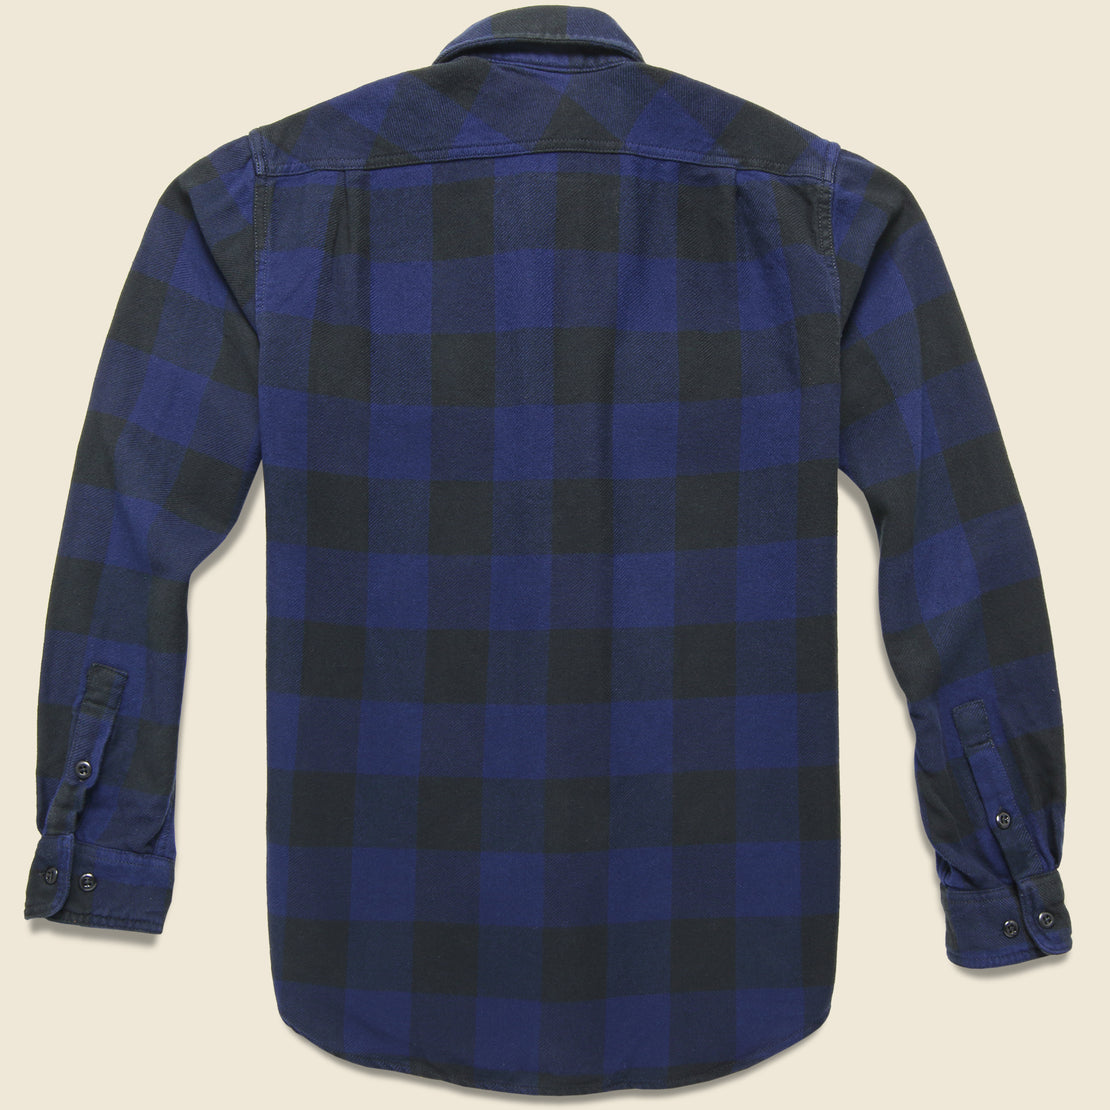 Vintage Flannel Workshirt - Dark Blue/ Charcoal - Filson - STAG Provisions - Tops - L/S Woven - Plaid